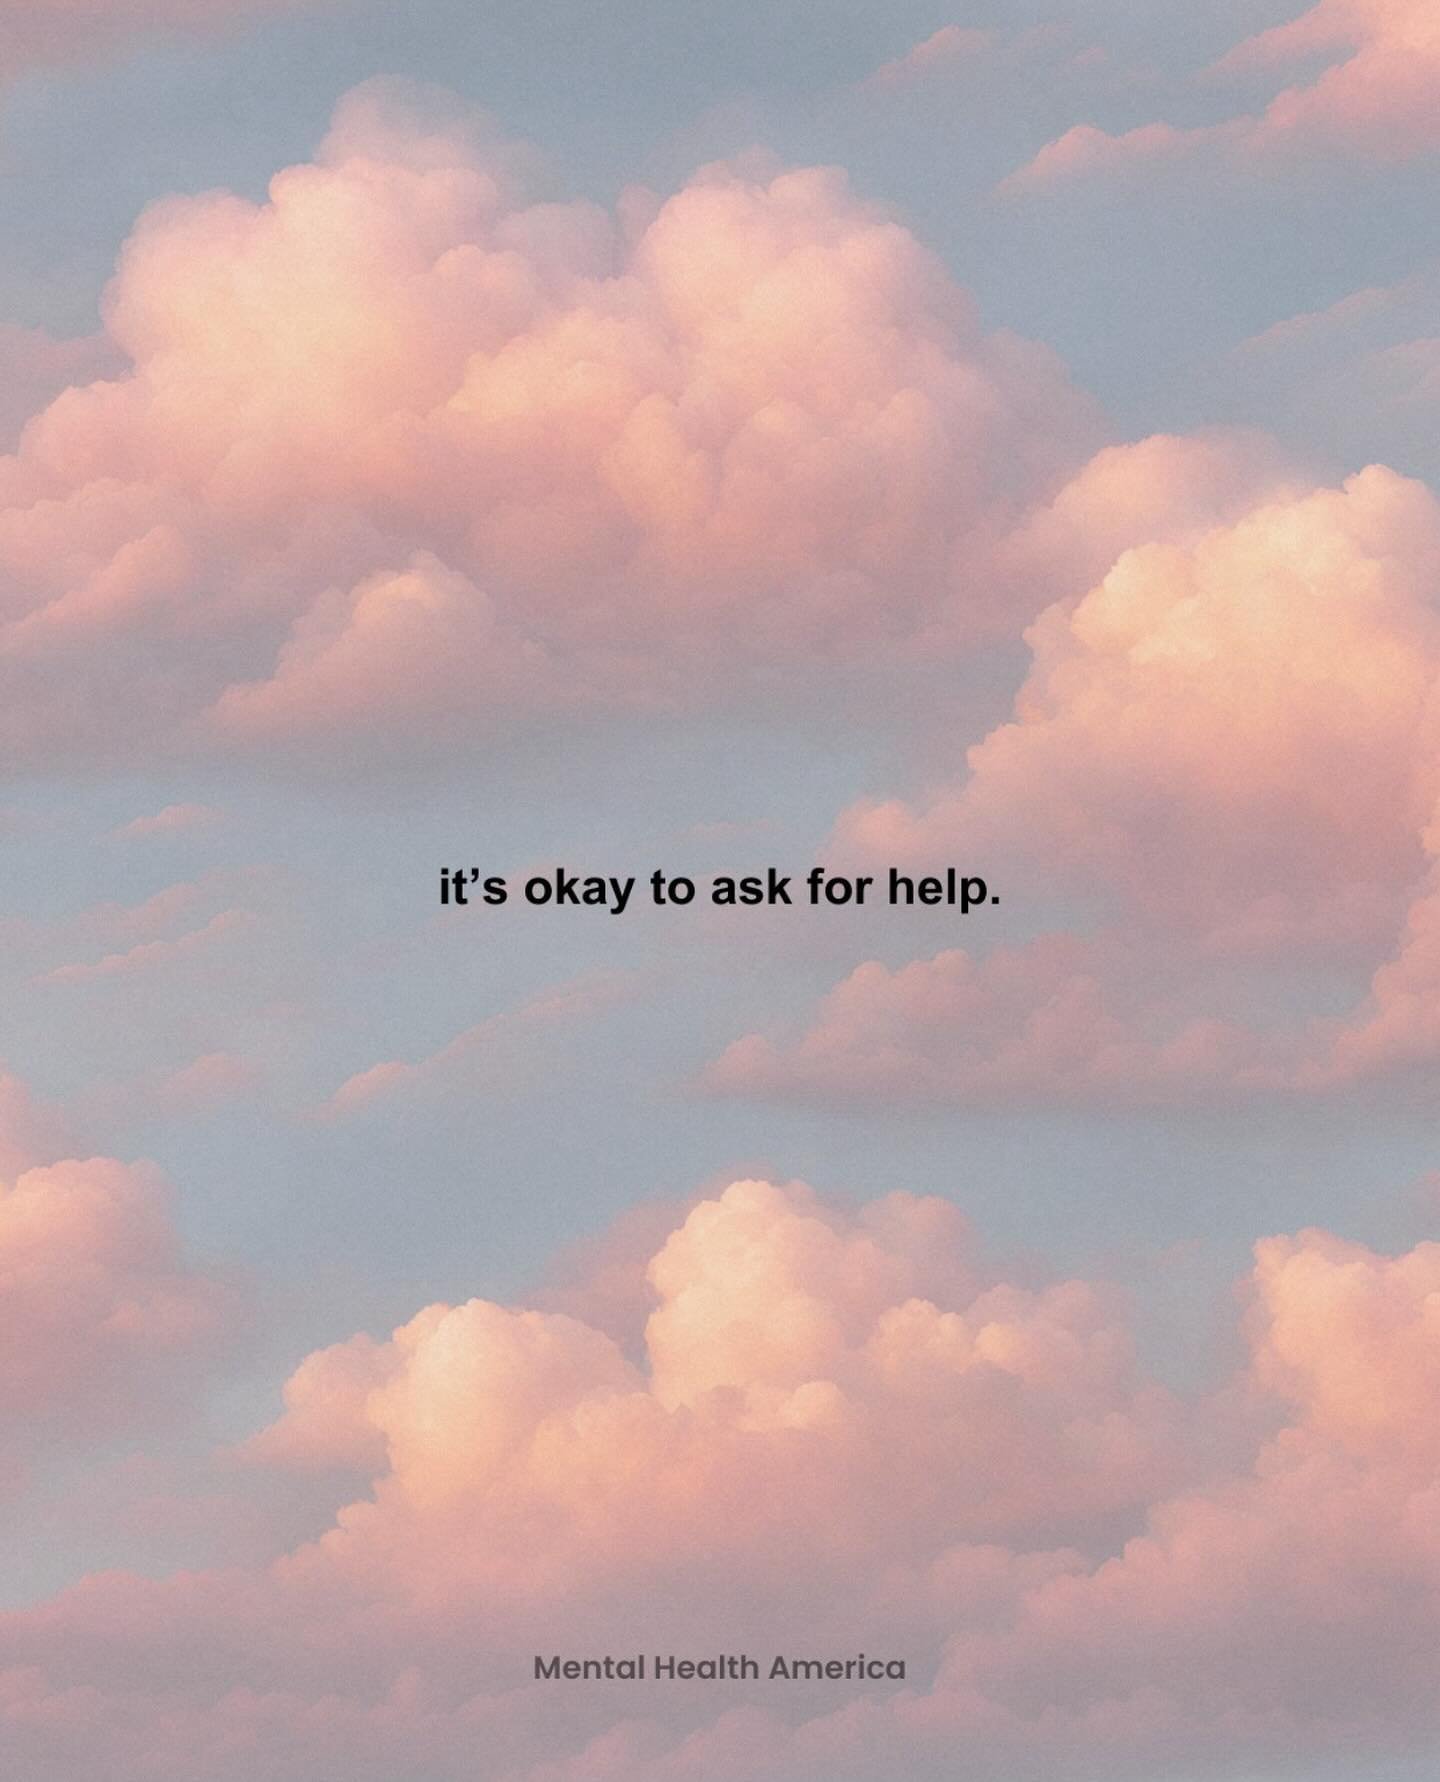 A gentle reminder that asking for help is really brave. 💙

If you&rsquo;re struggling or are in crisis, help is available. Call or text 988 or chat 988lifeline.org. 

&mdash; Repost from @mentalhealthamerica 🫶🏽

&bull;
&bull;

Find a therapist of 